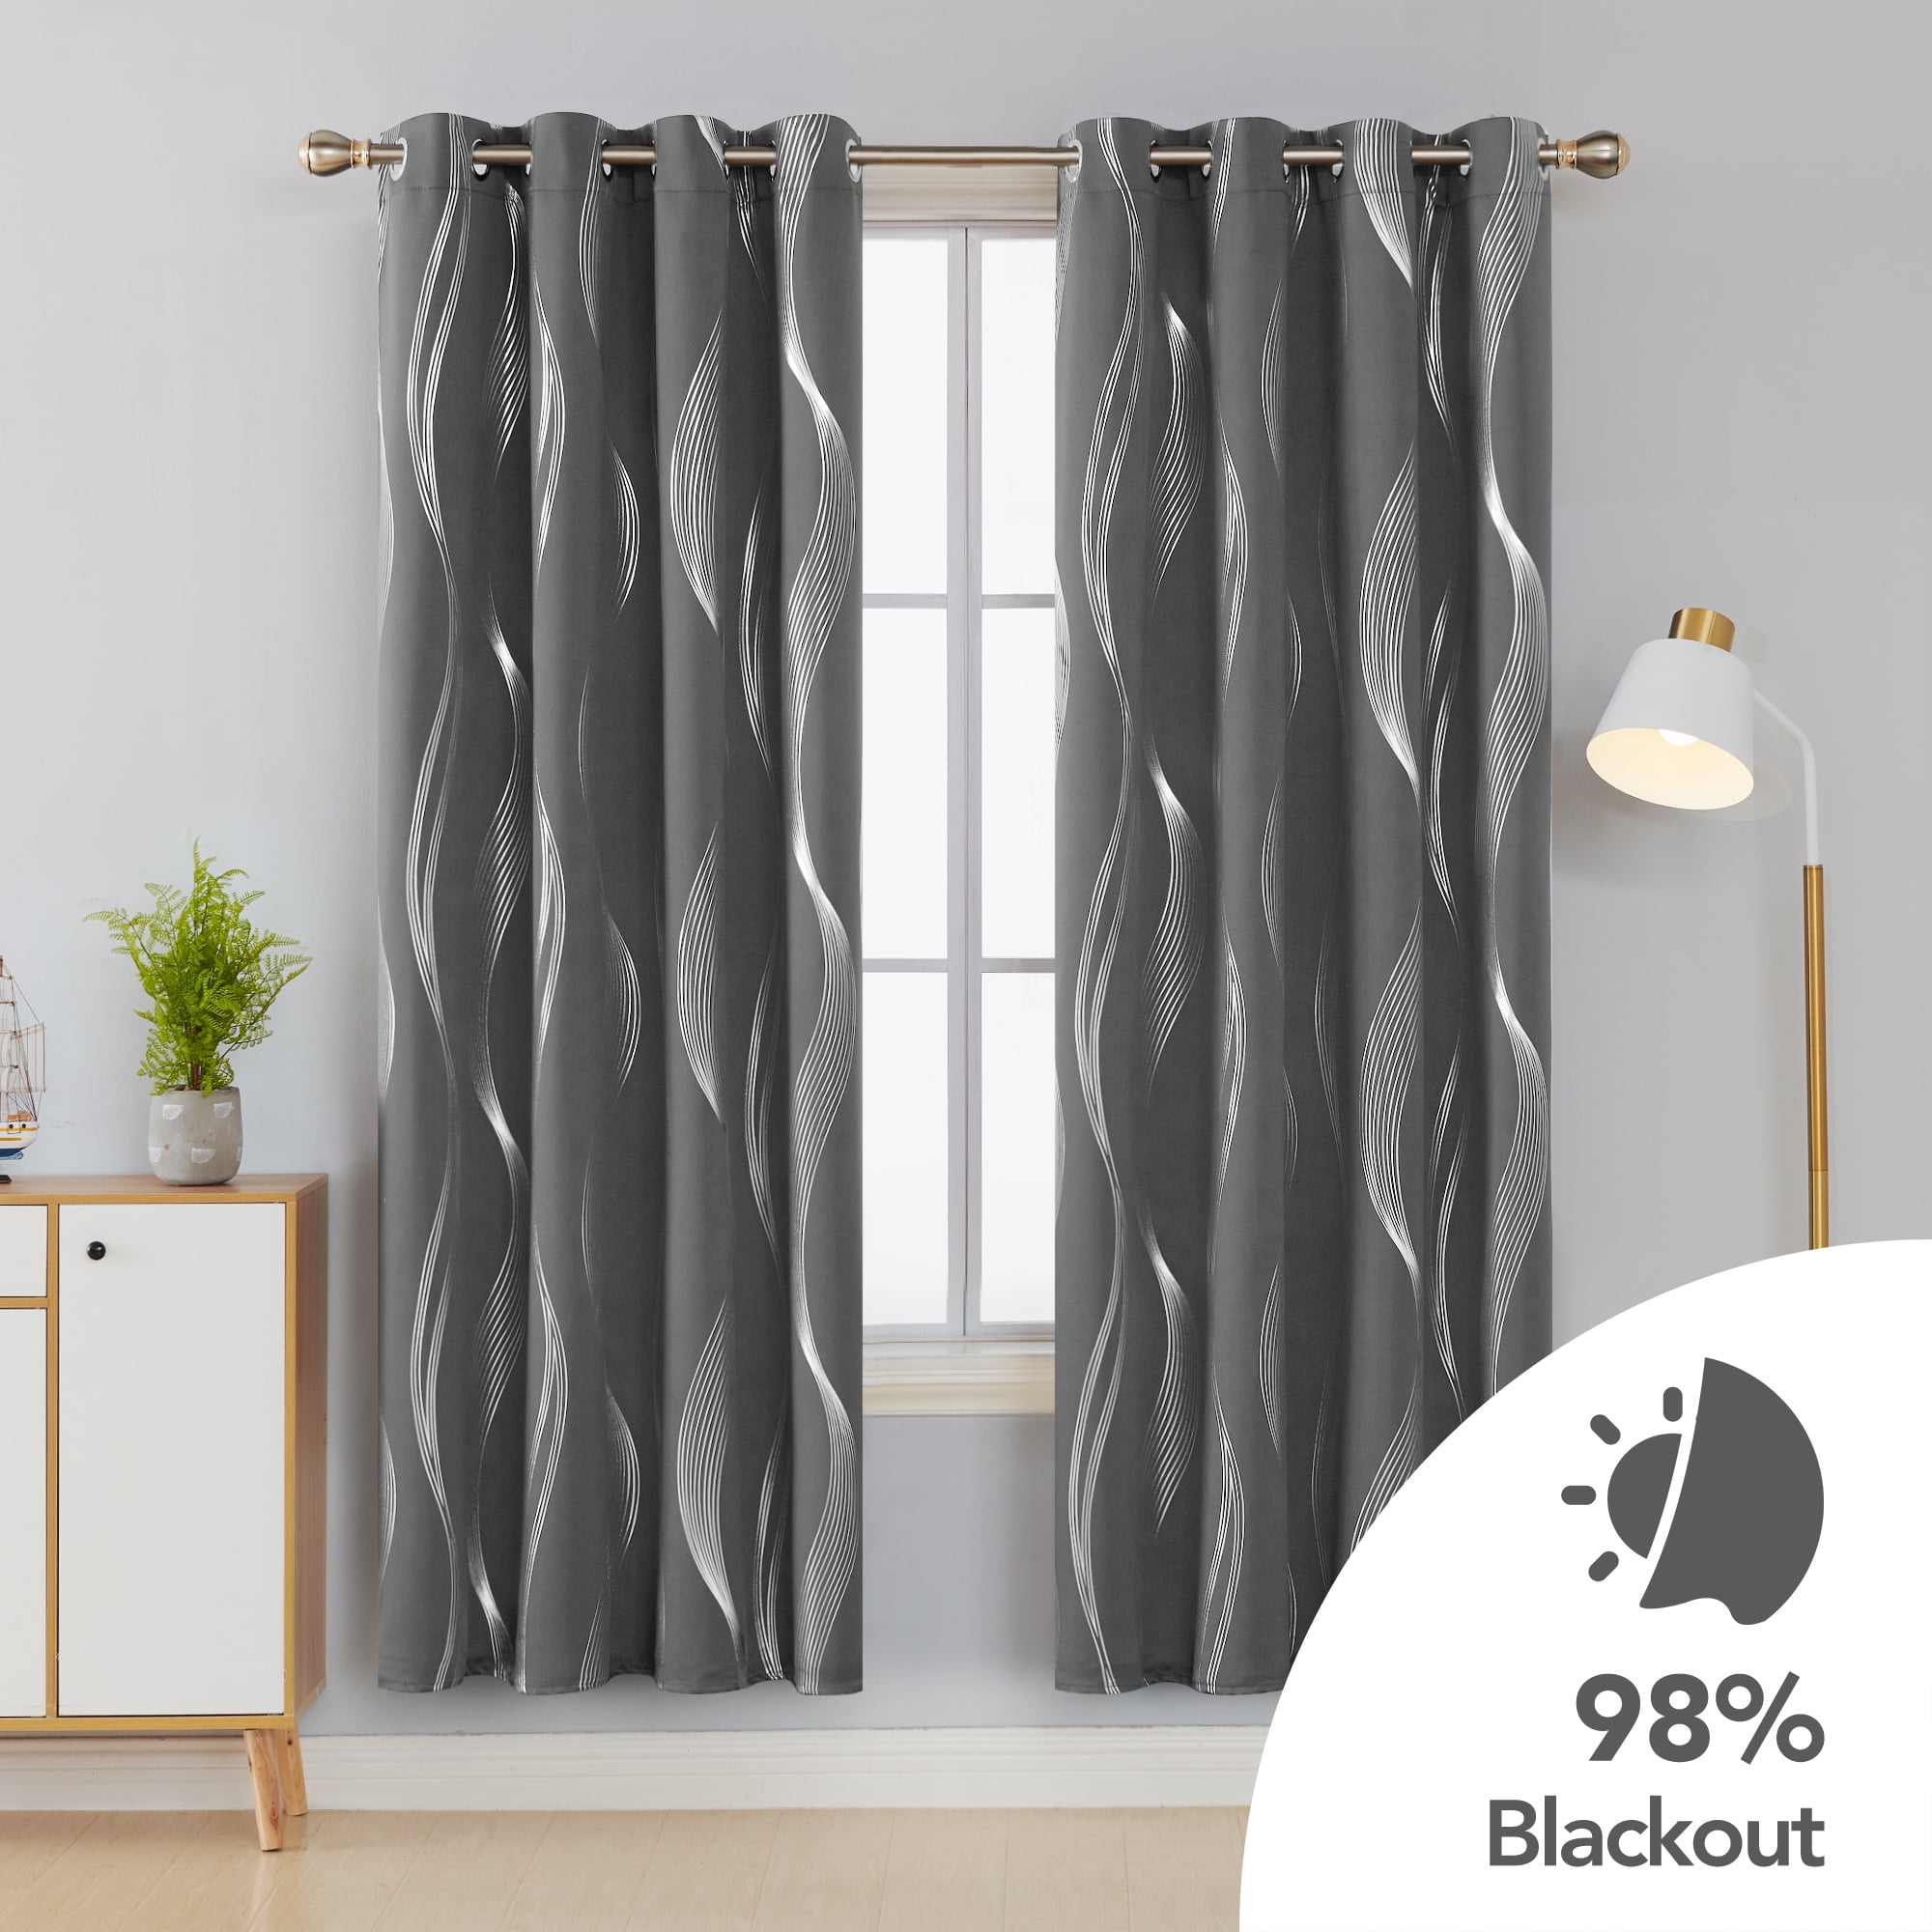 Window Treatment Silver Wave Line Foil Printed Blackout Curtains for Nursery 66 x 72 Inch Deconovo Eyelet Room Darkening Curtains 1 Pair Beige Width x Length